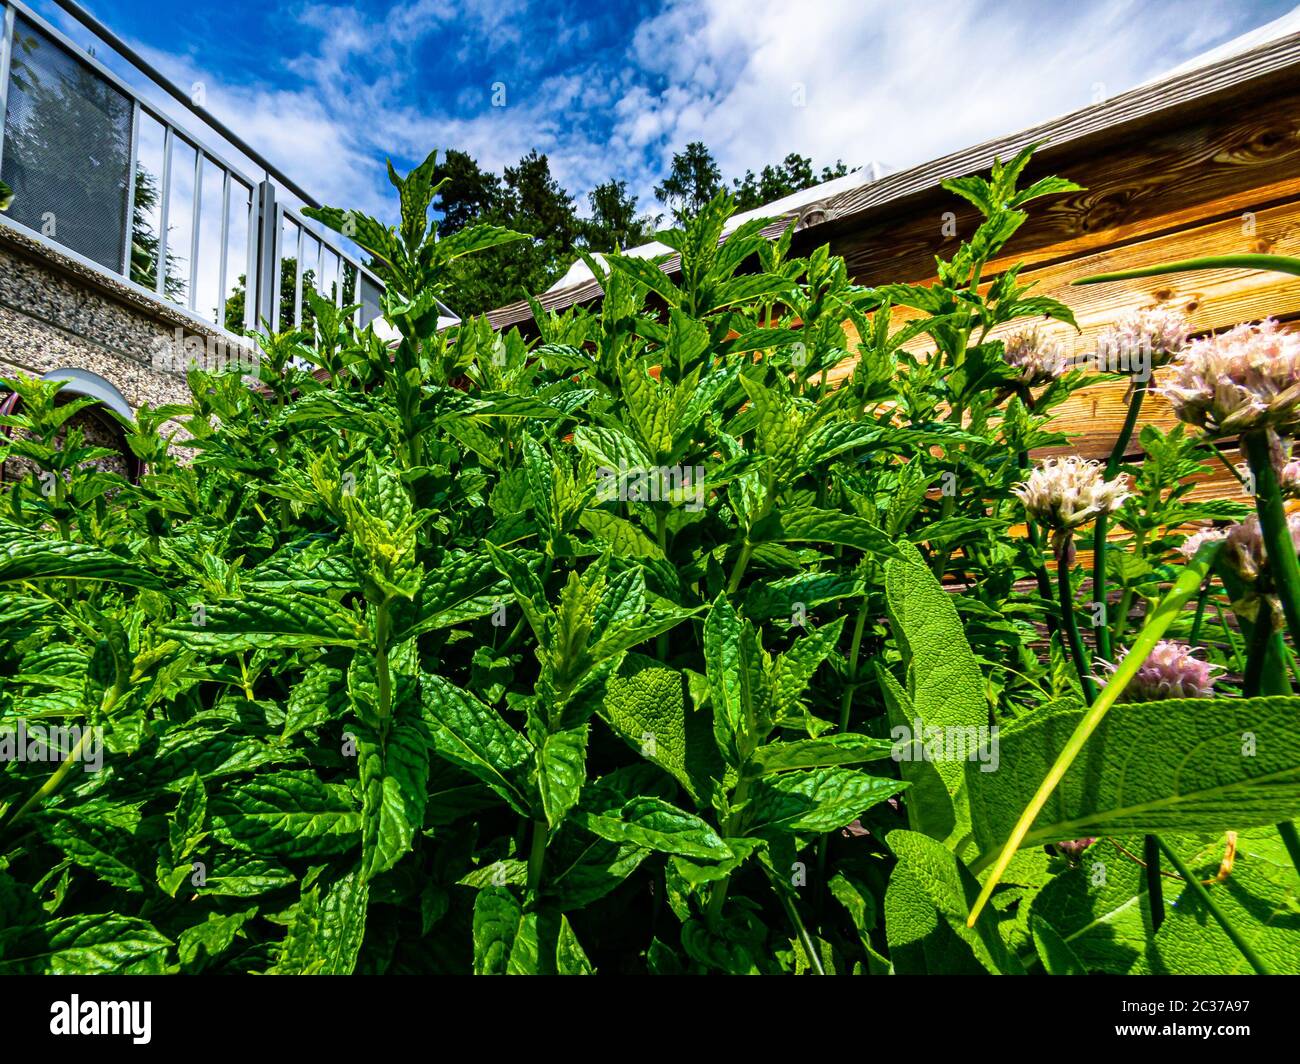 Carinthian mint ( Mentha x carinthiaca) in front of blue sky and a wooden planter Stock Photo